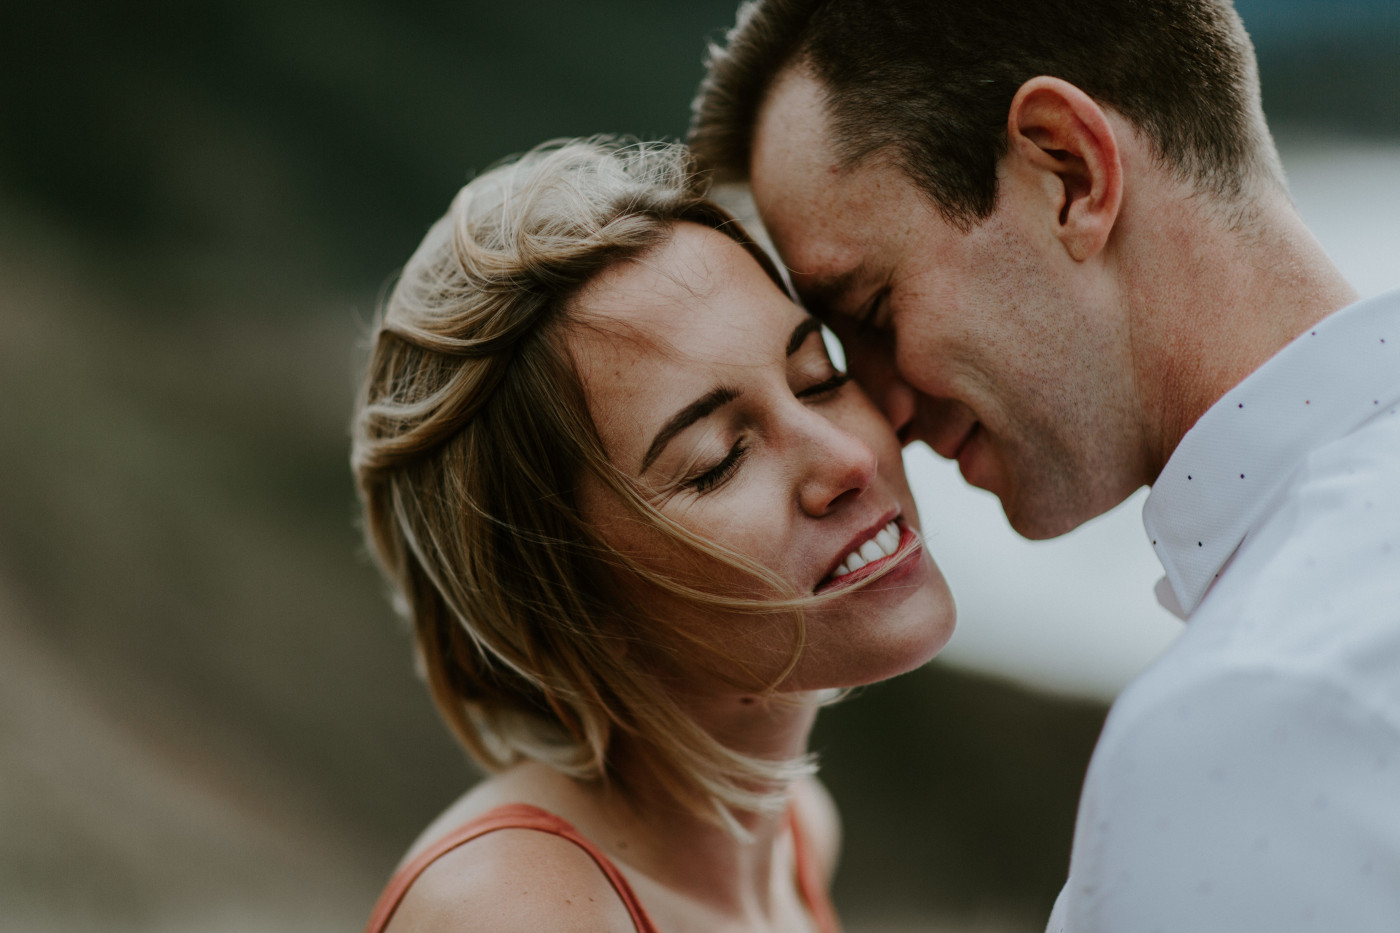 Billy and Chelsey share a moment. Elopement wedding photography at Cannon Beach by Sienna Plus Josh.